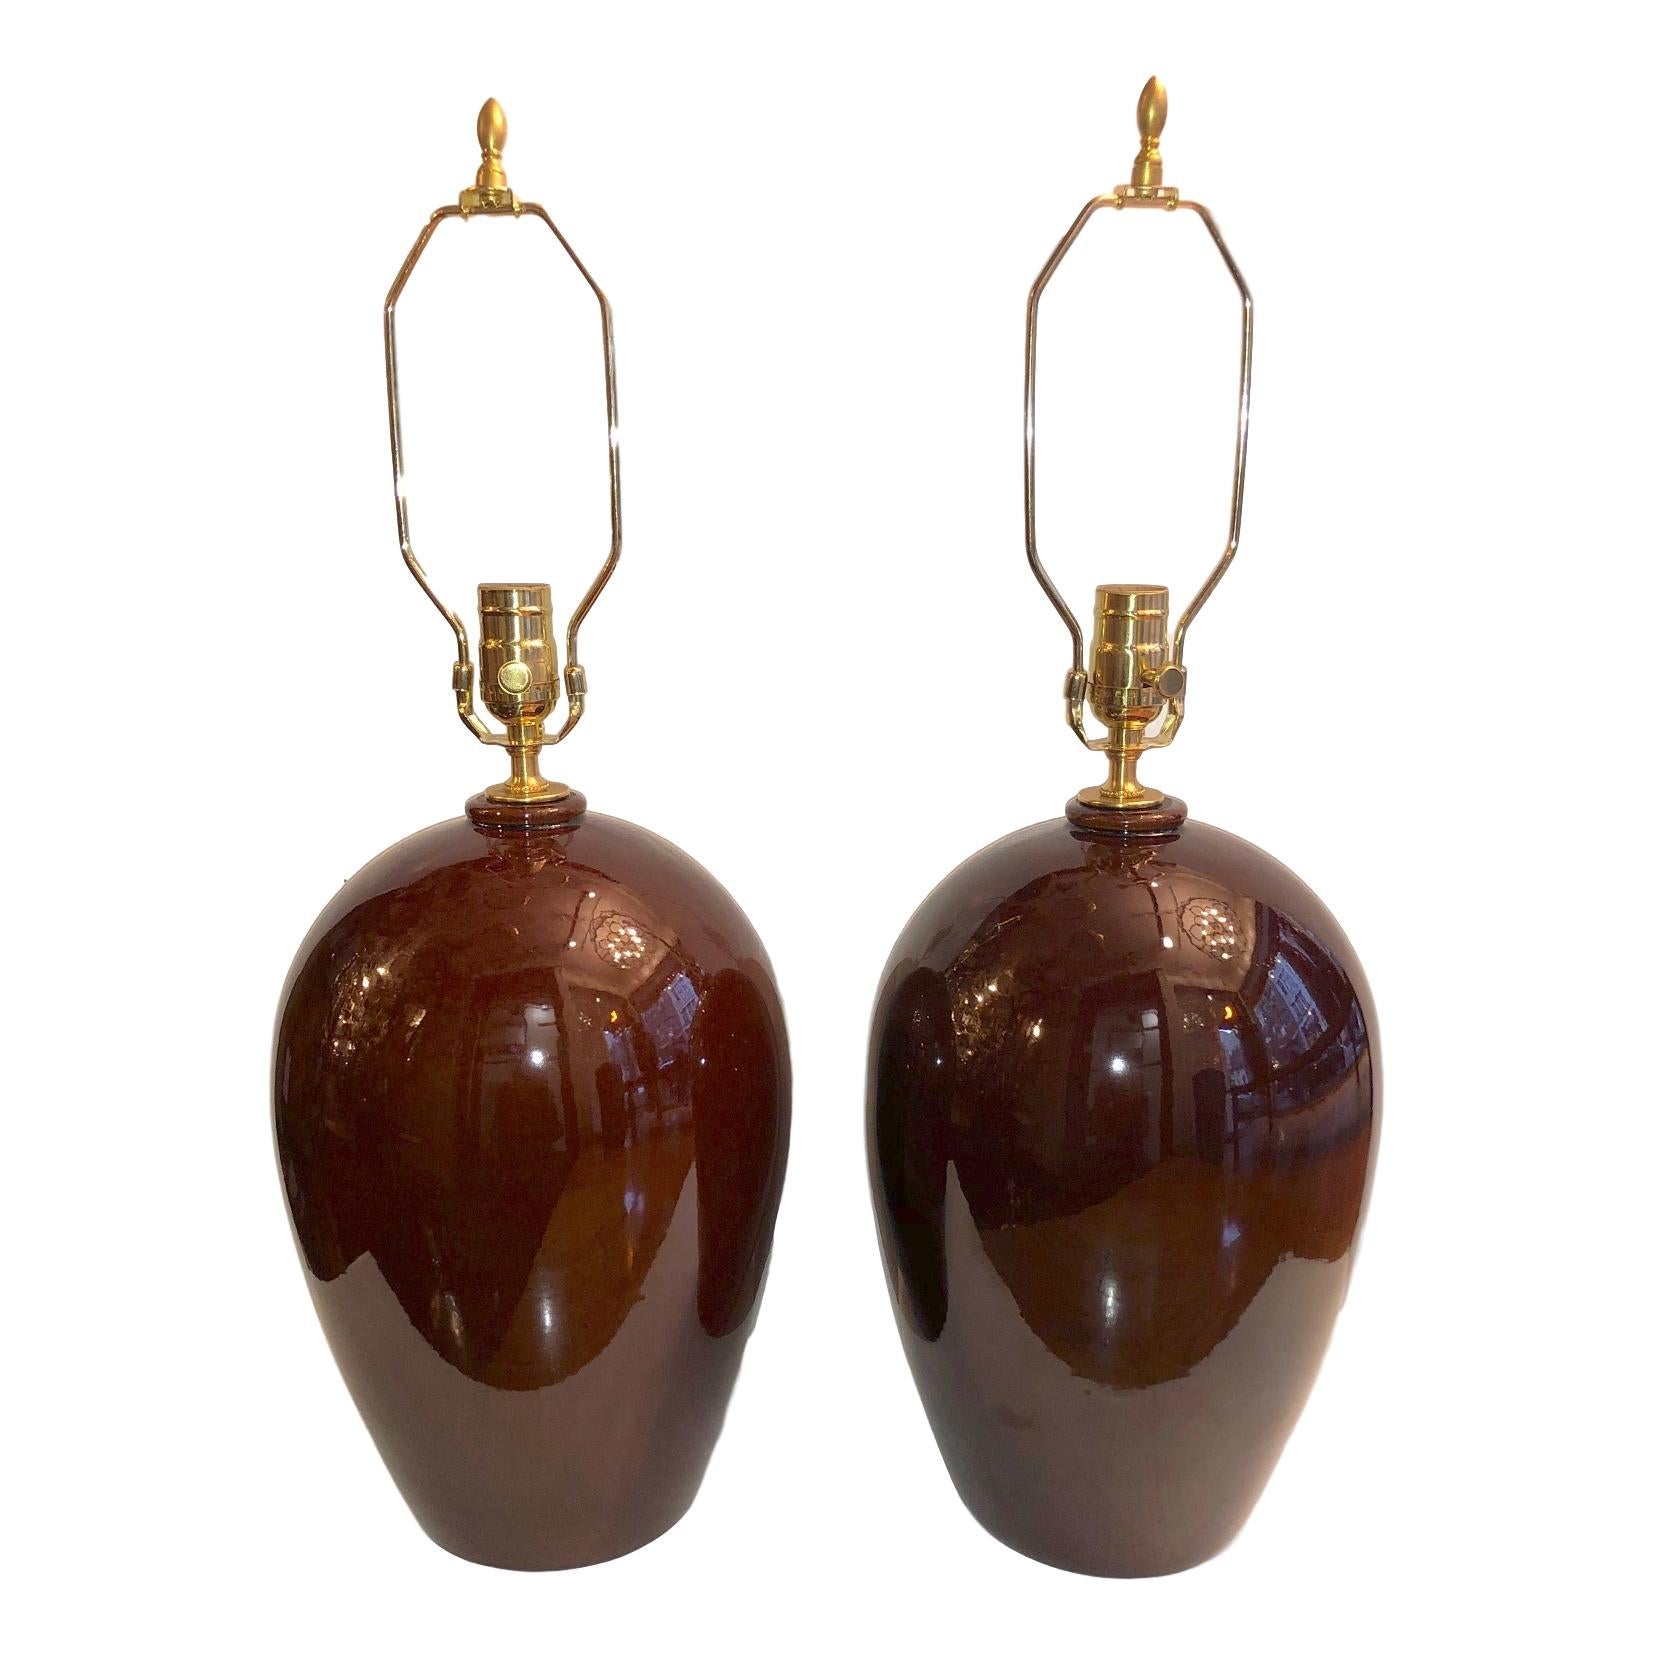 A pair of circa 1940's French ox blood color table lamps.

Measurements:
Height of body: 14.5